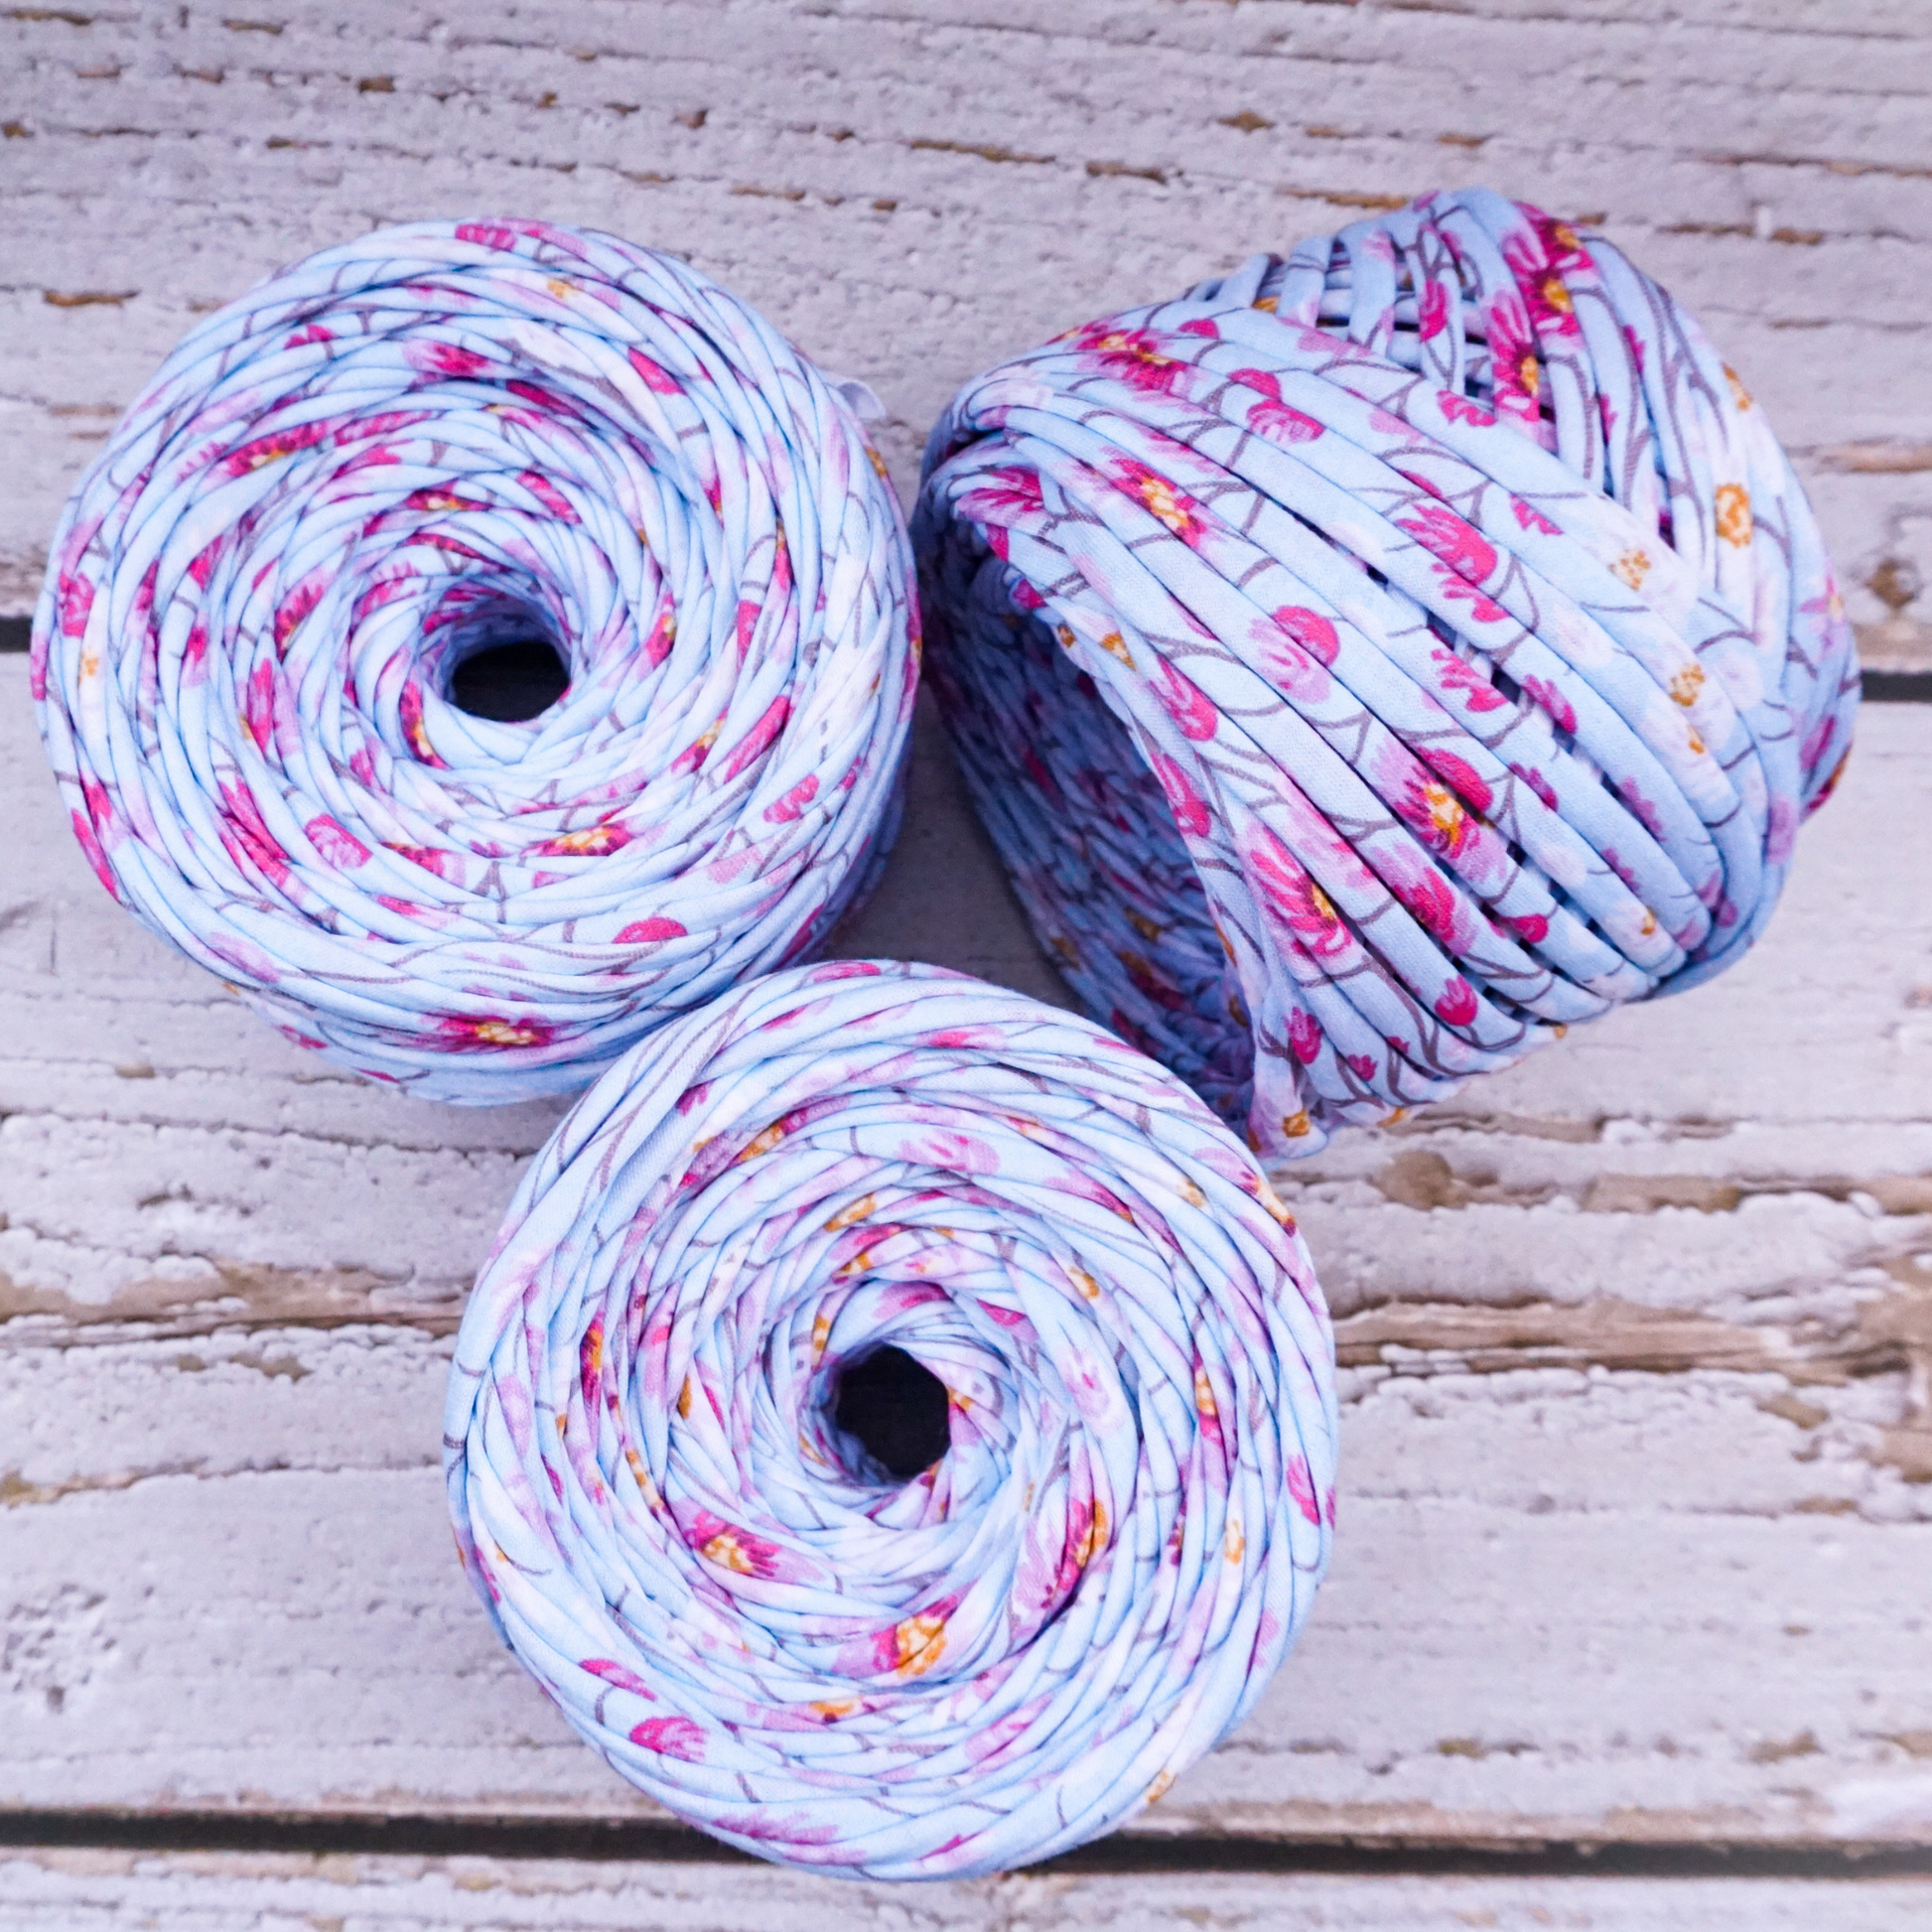 T-shirt yarn for crocheting baskets, bags, rugs and home decor. Flower –  Knitznpurlz